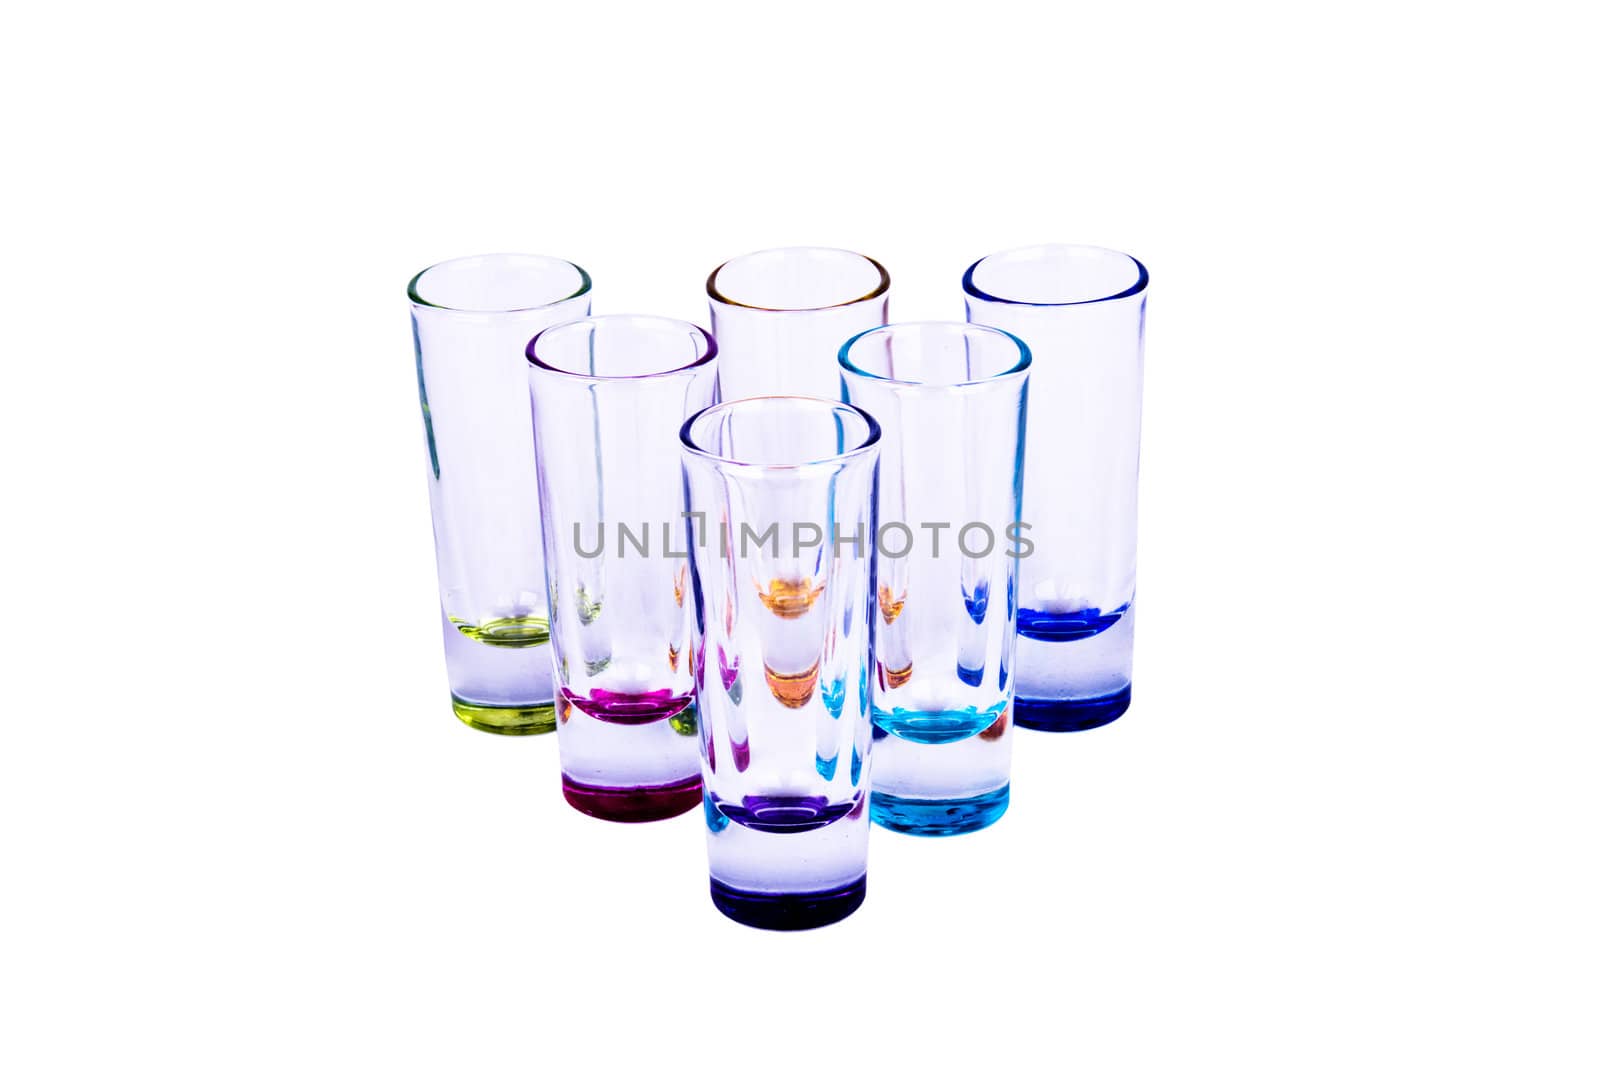 A collection of shot's in different colors on white background